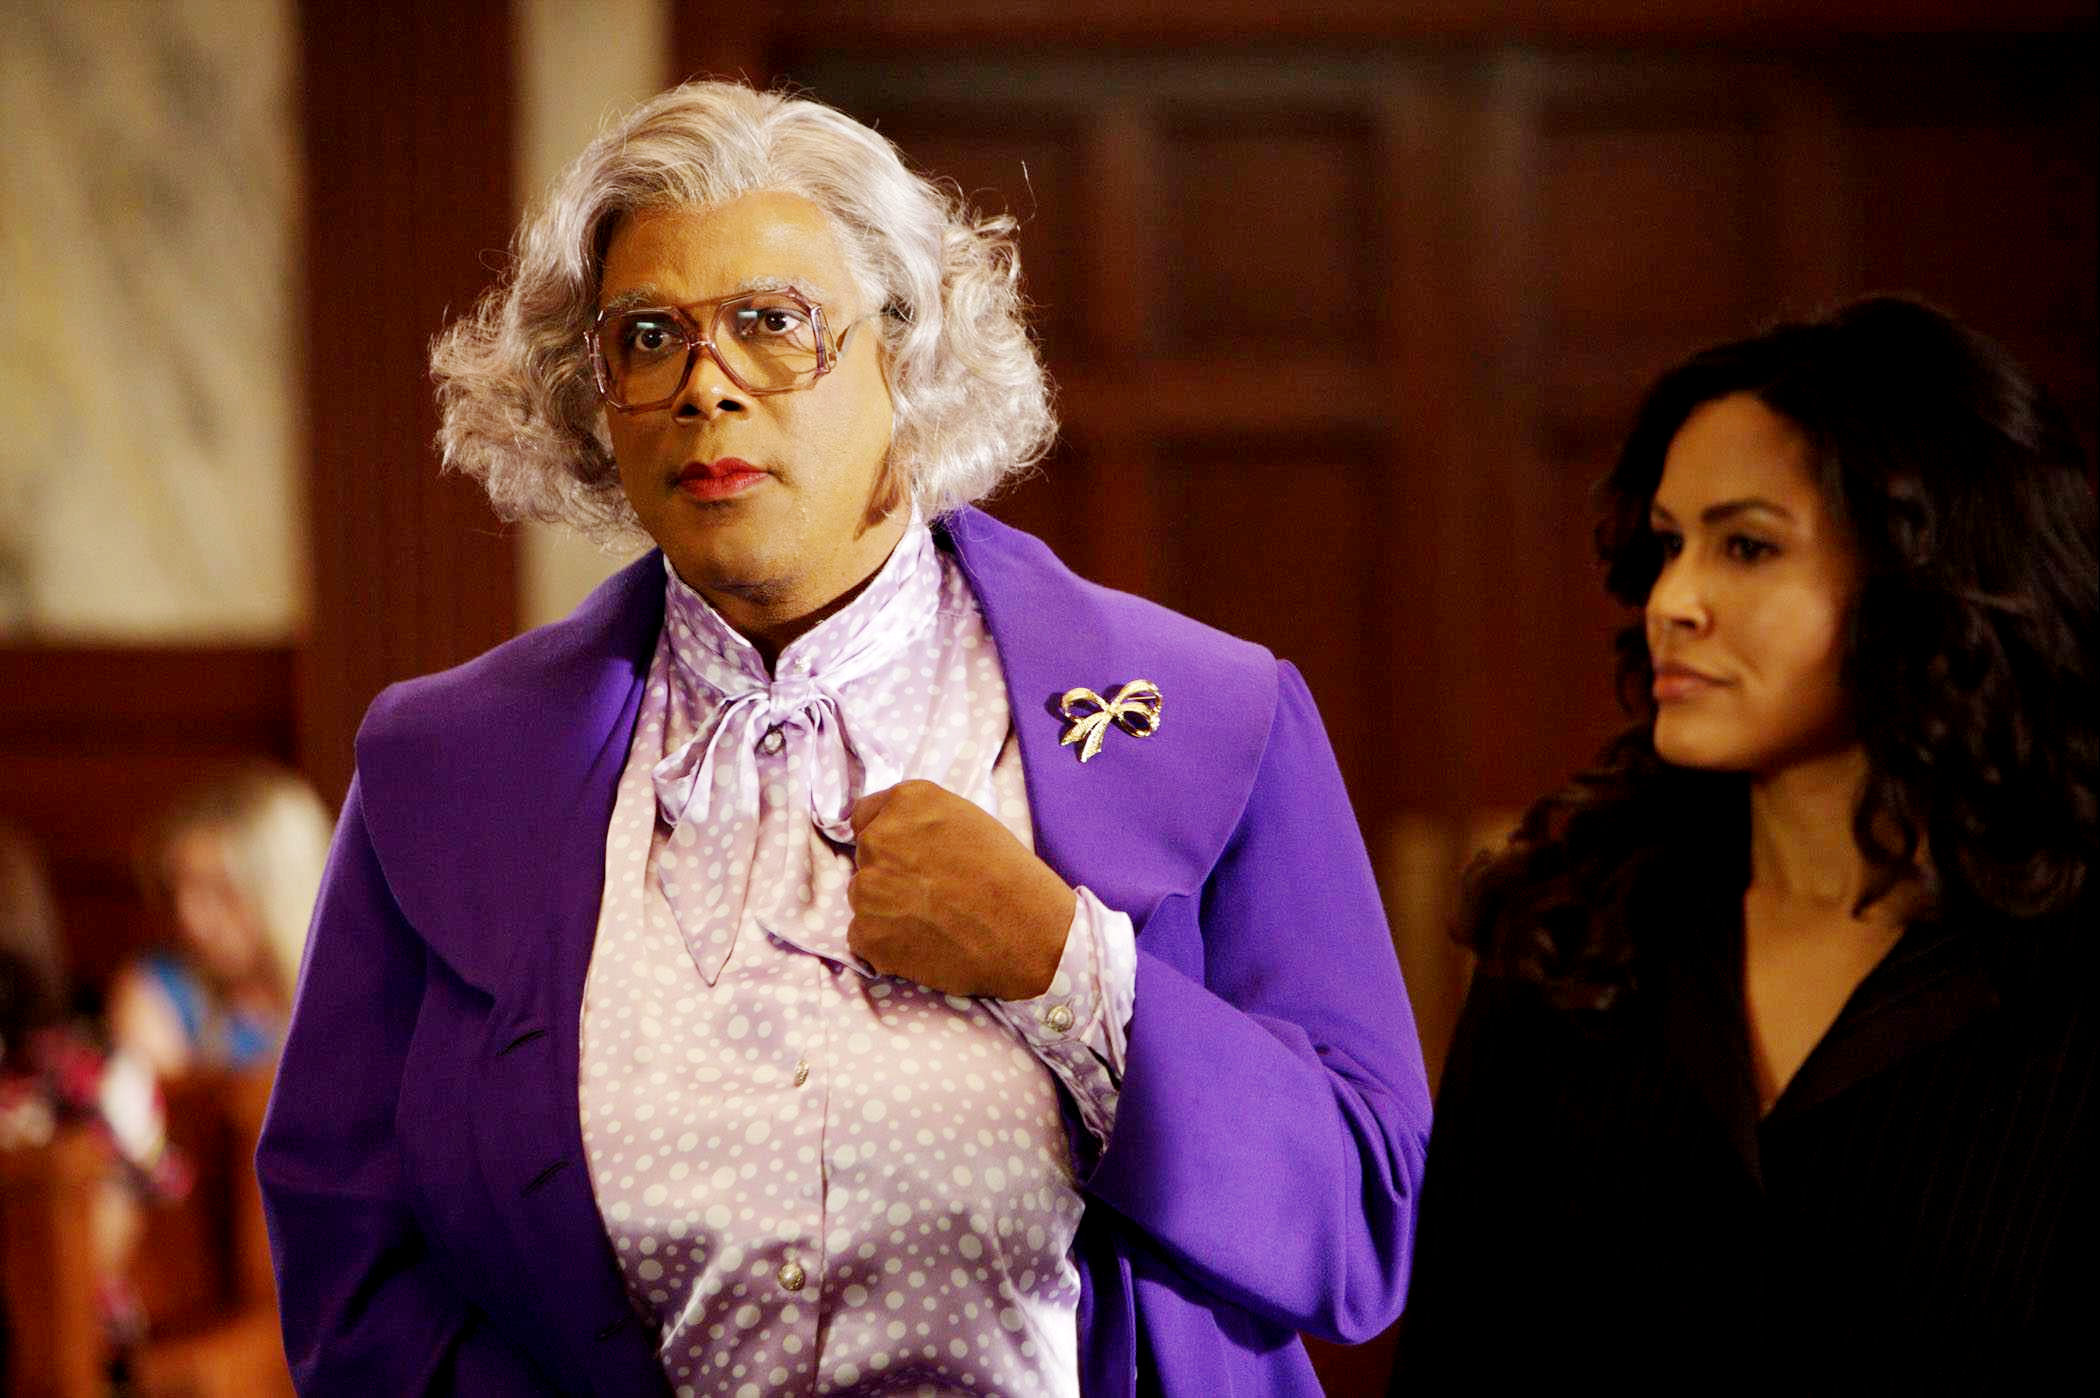 Tyler Perry stars as Madea in Lionsgate Films' Madea Goes to Jail (2009). Photo credit by Quantrell Colbert.